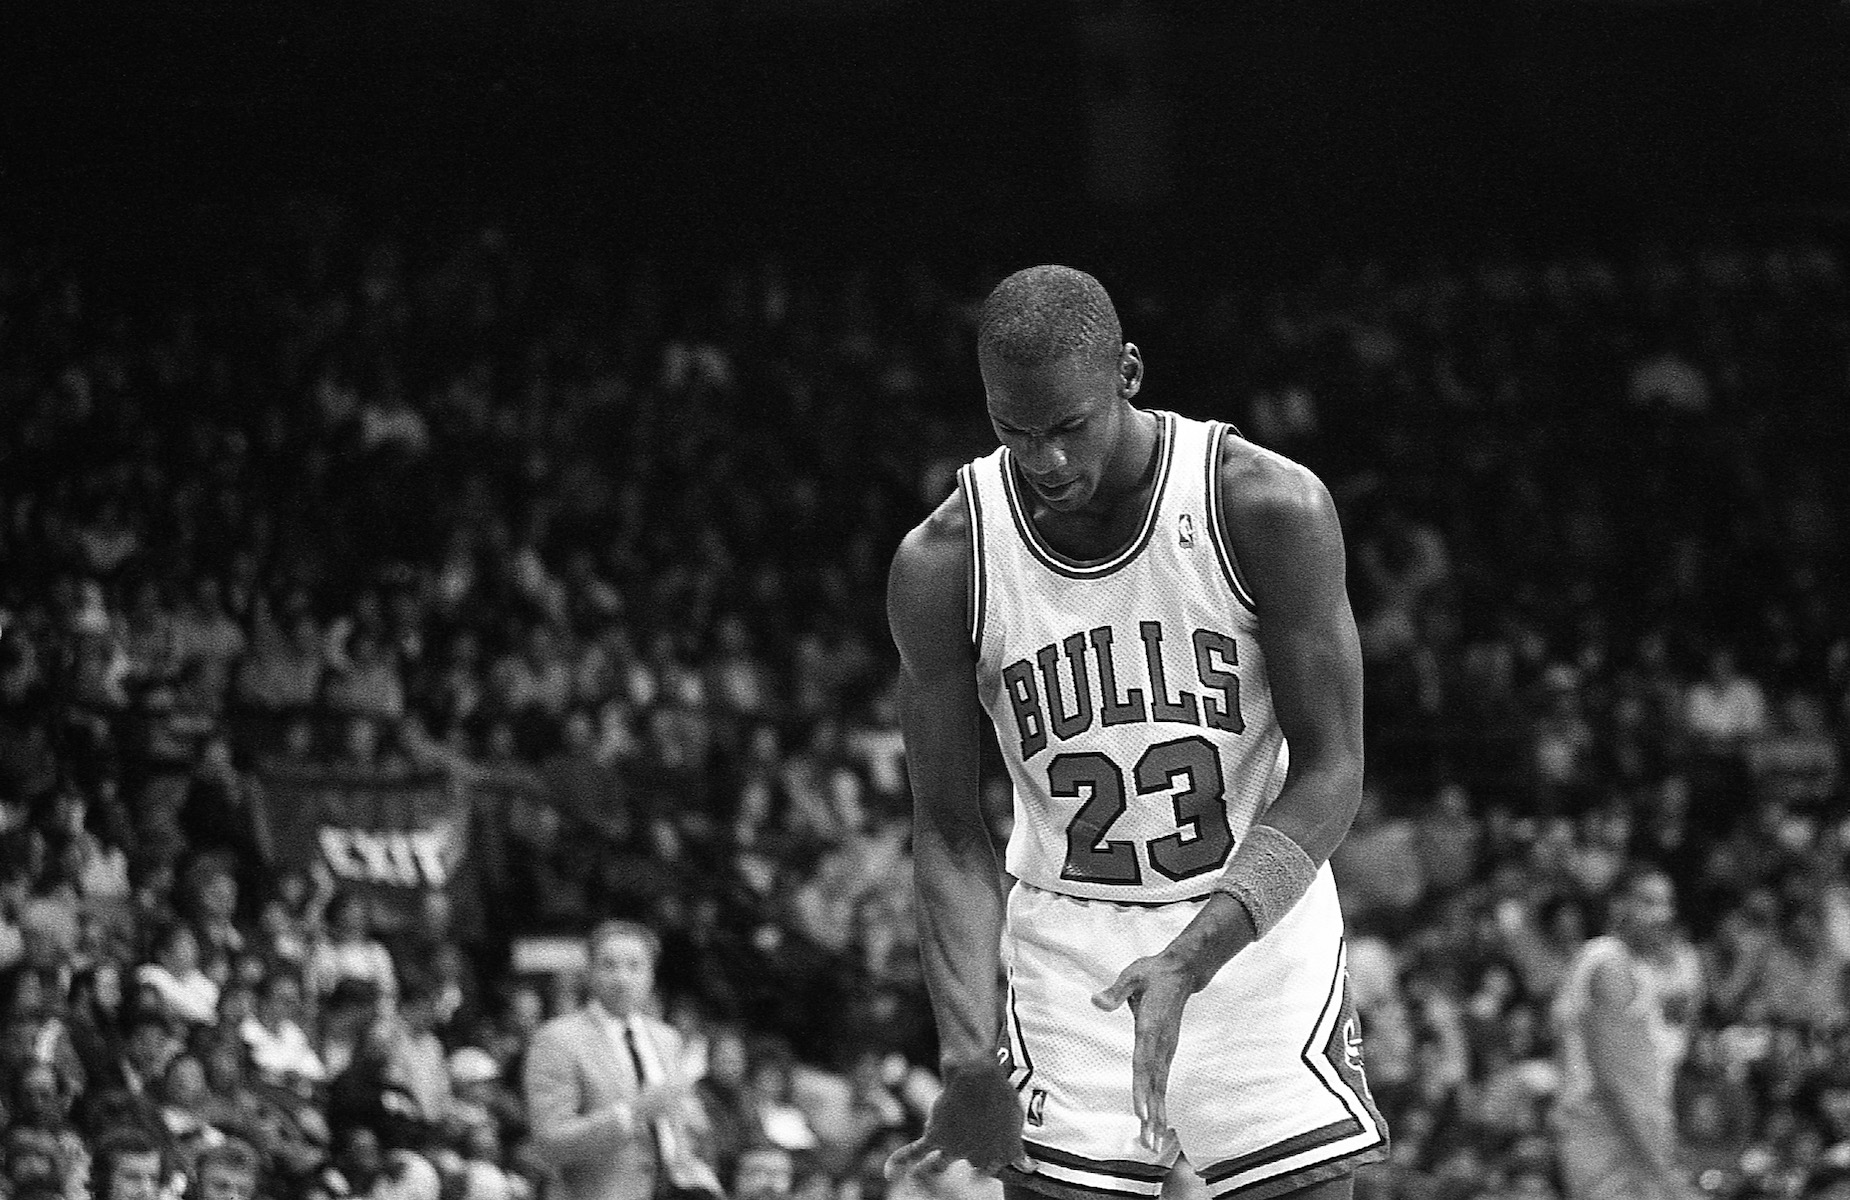 Michael Jordan at the free throw line for the Chicago Bulls.